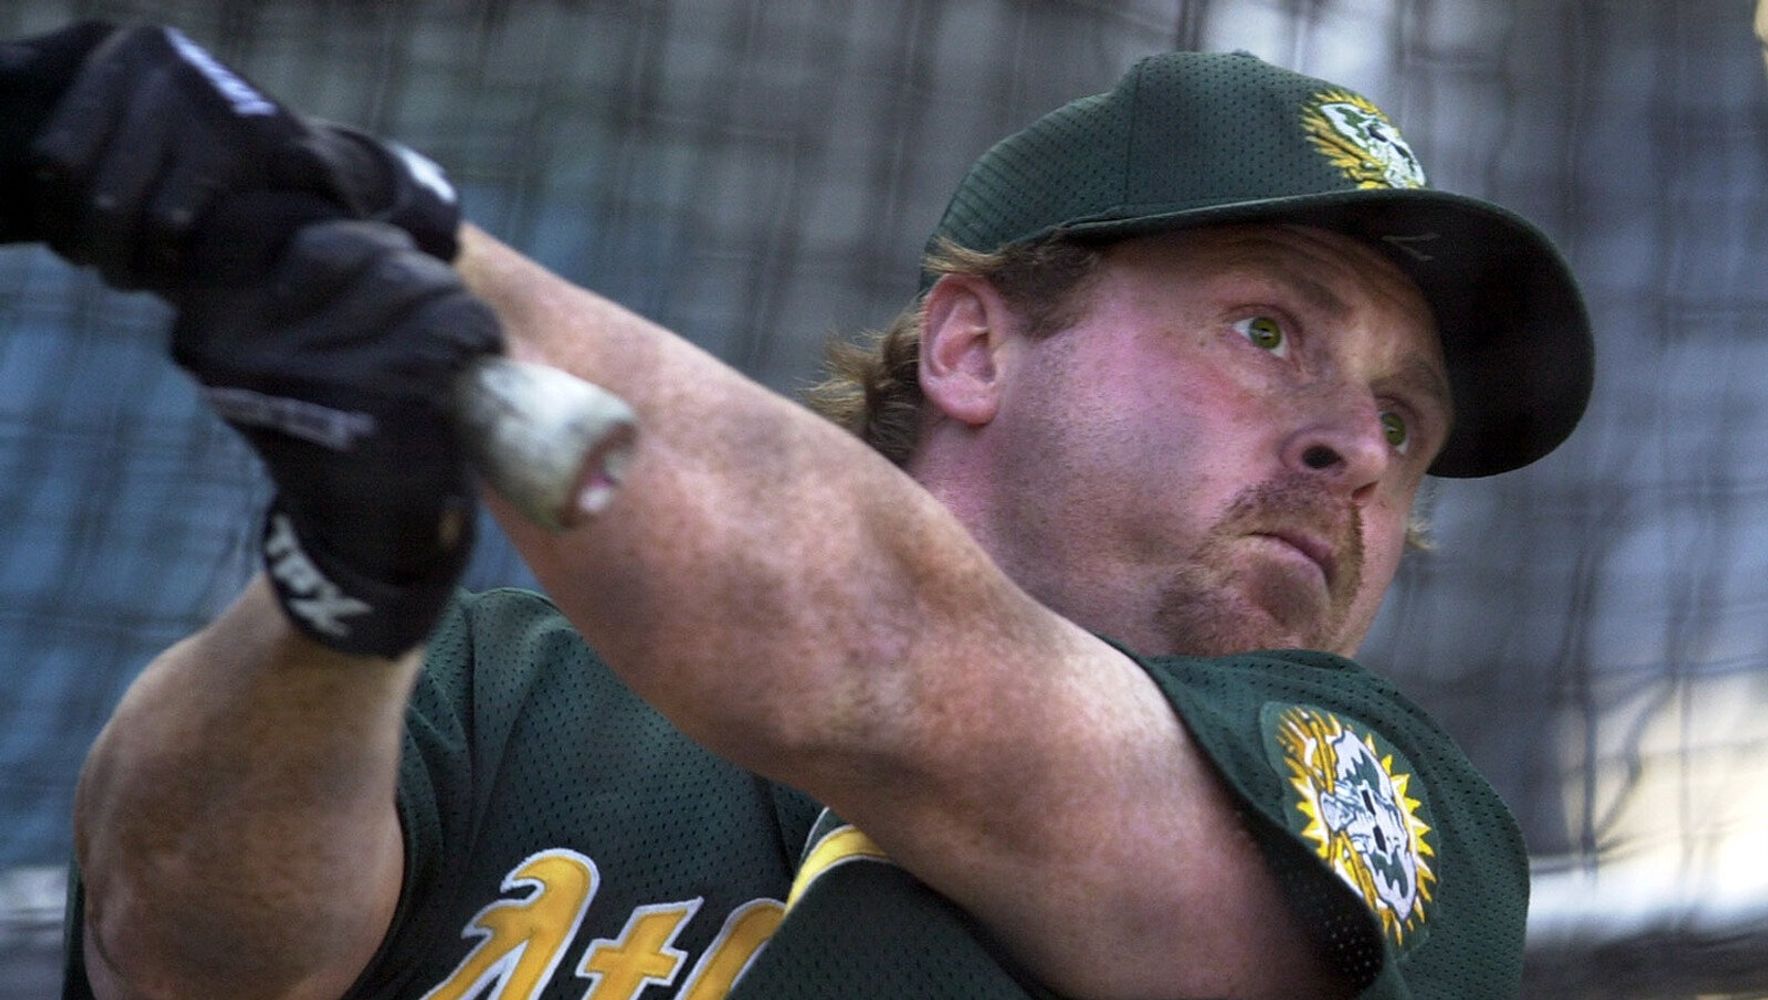 Former major leaguer Jeremy Giambi took his own life in Claremont